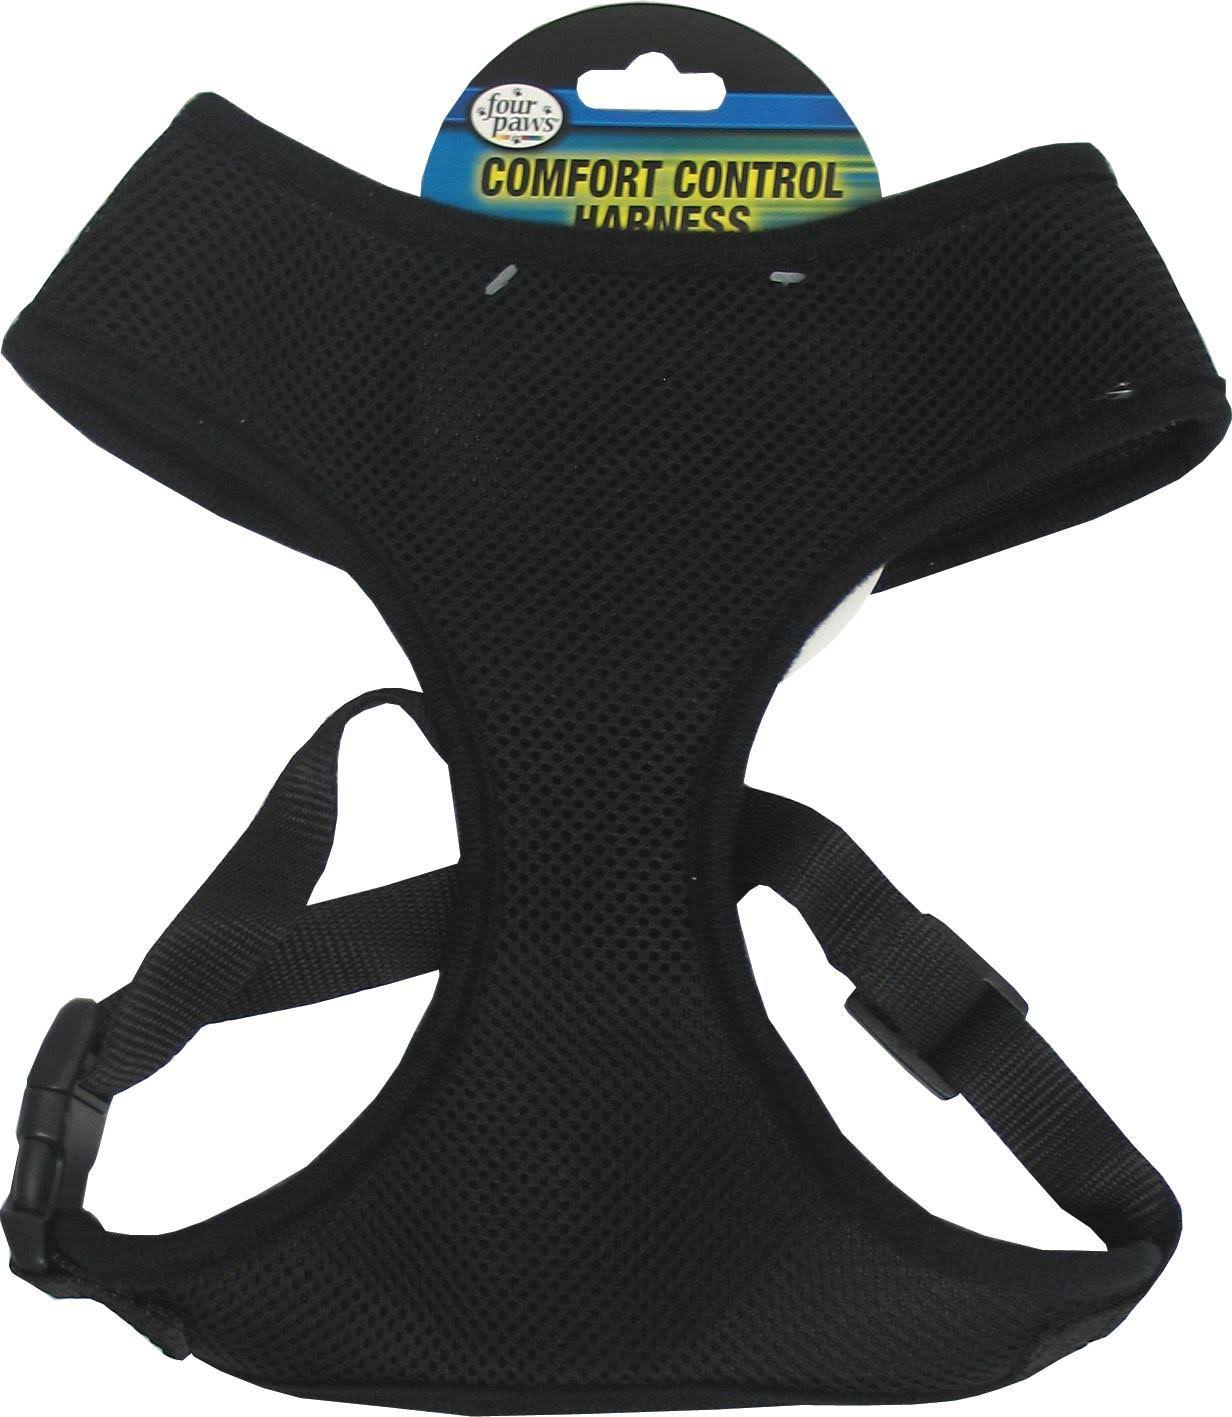 Four Paws Comfort Control Dog Harness - Black